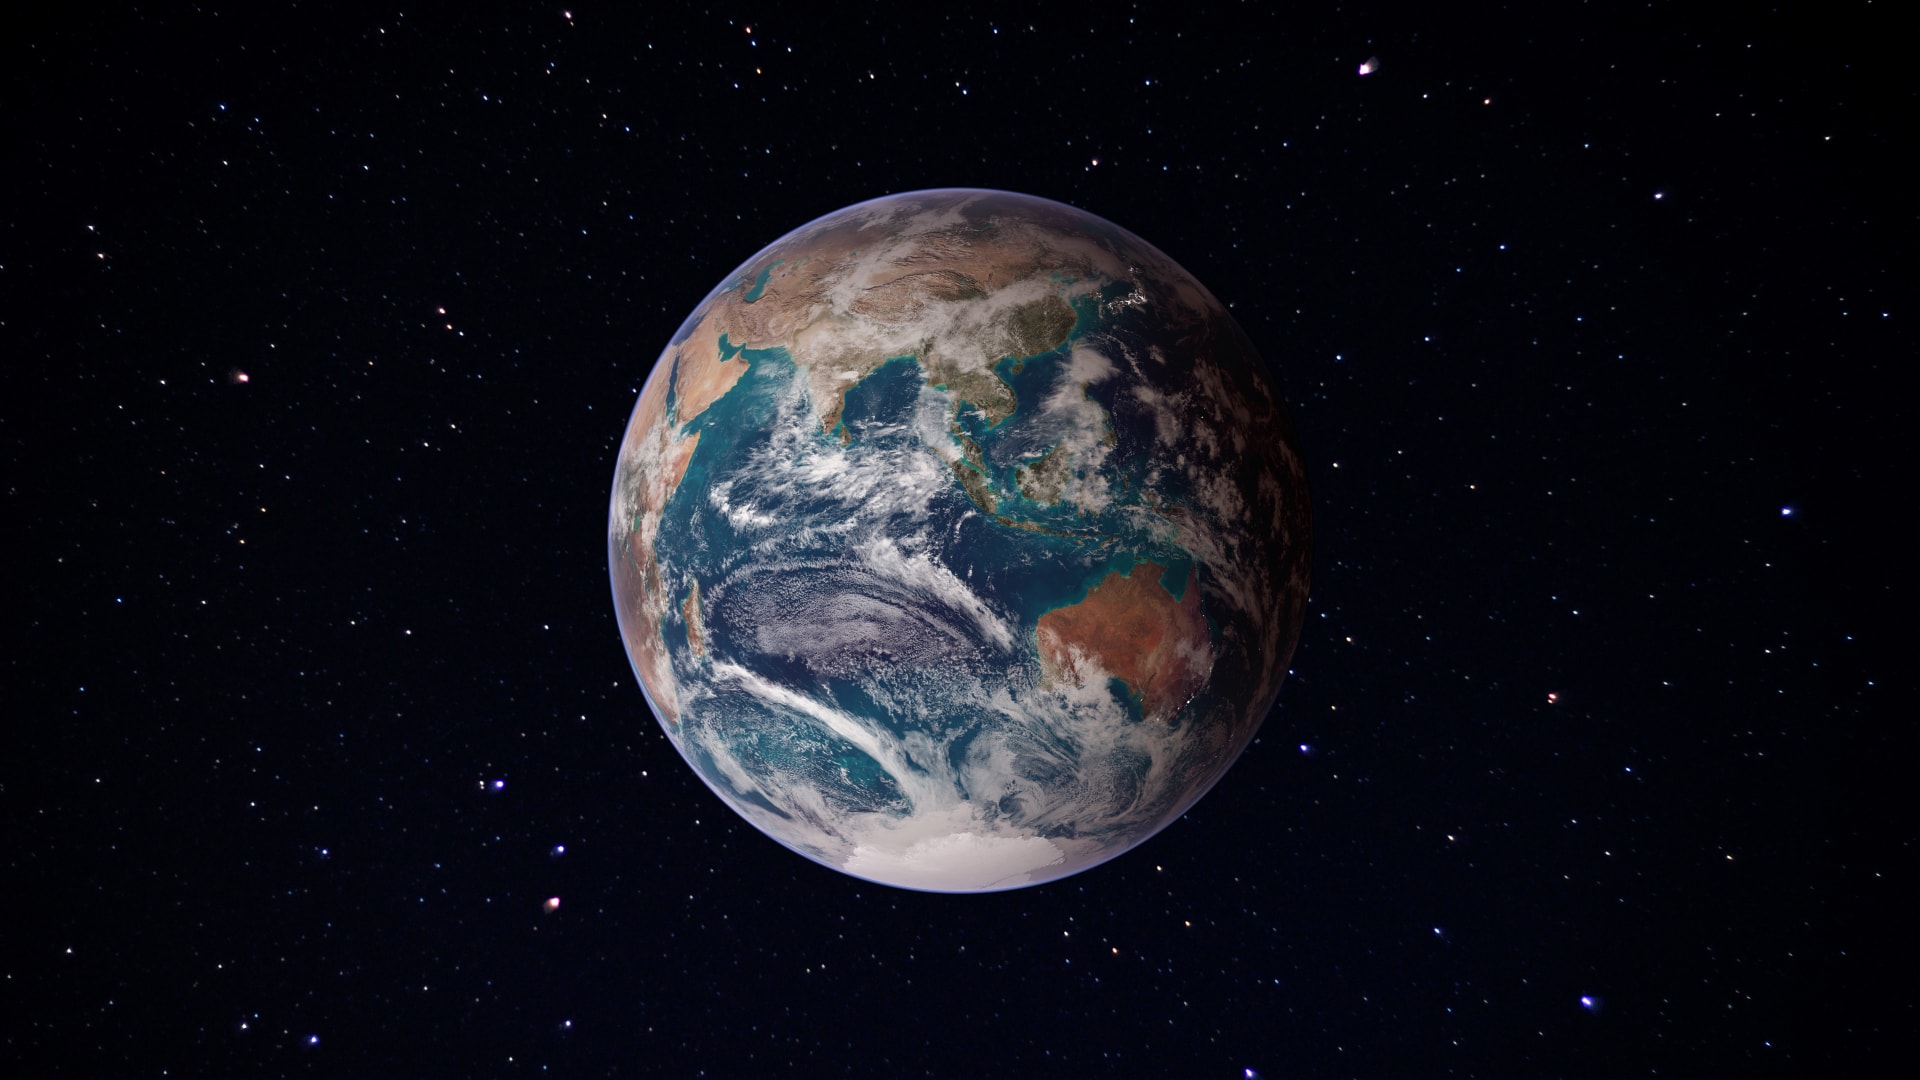 A picture of Earth